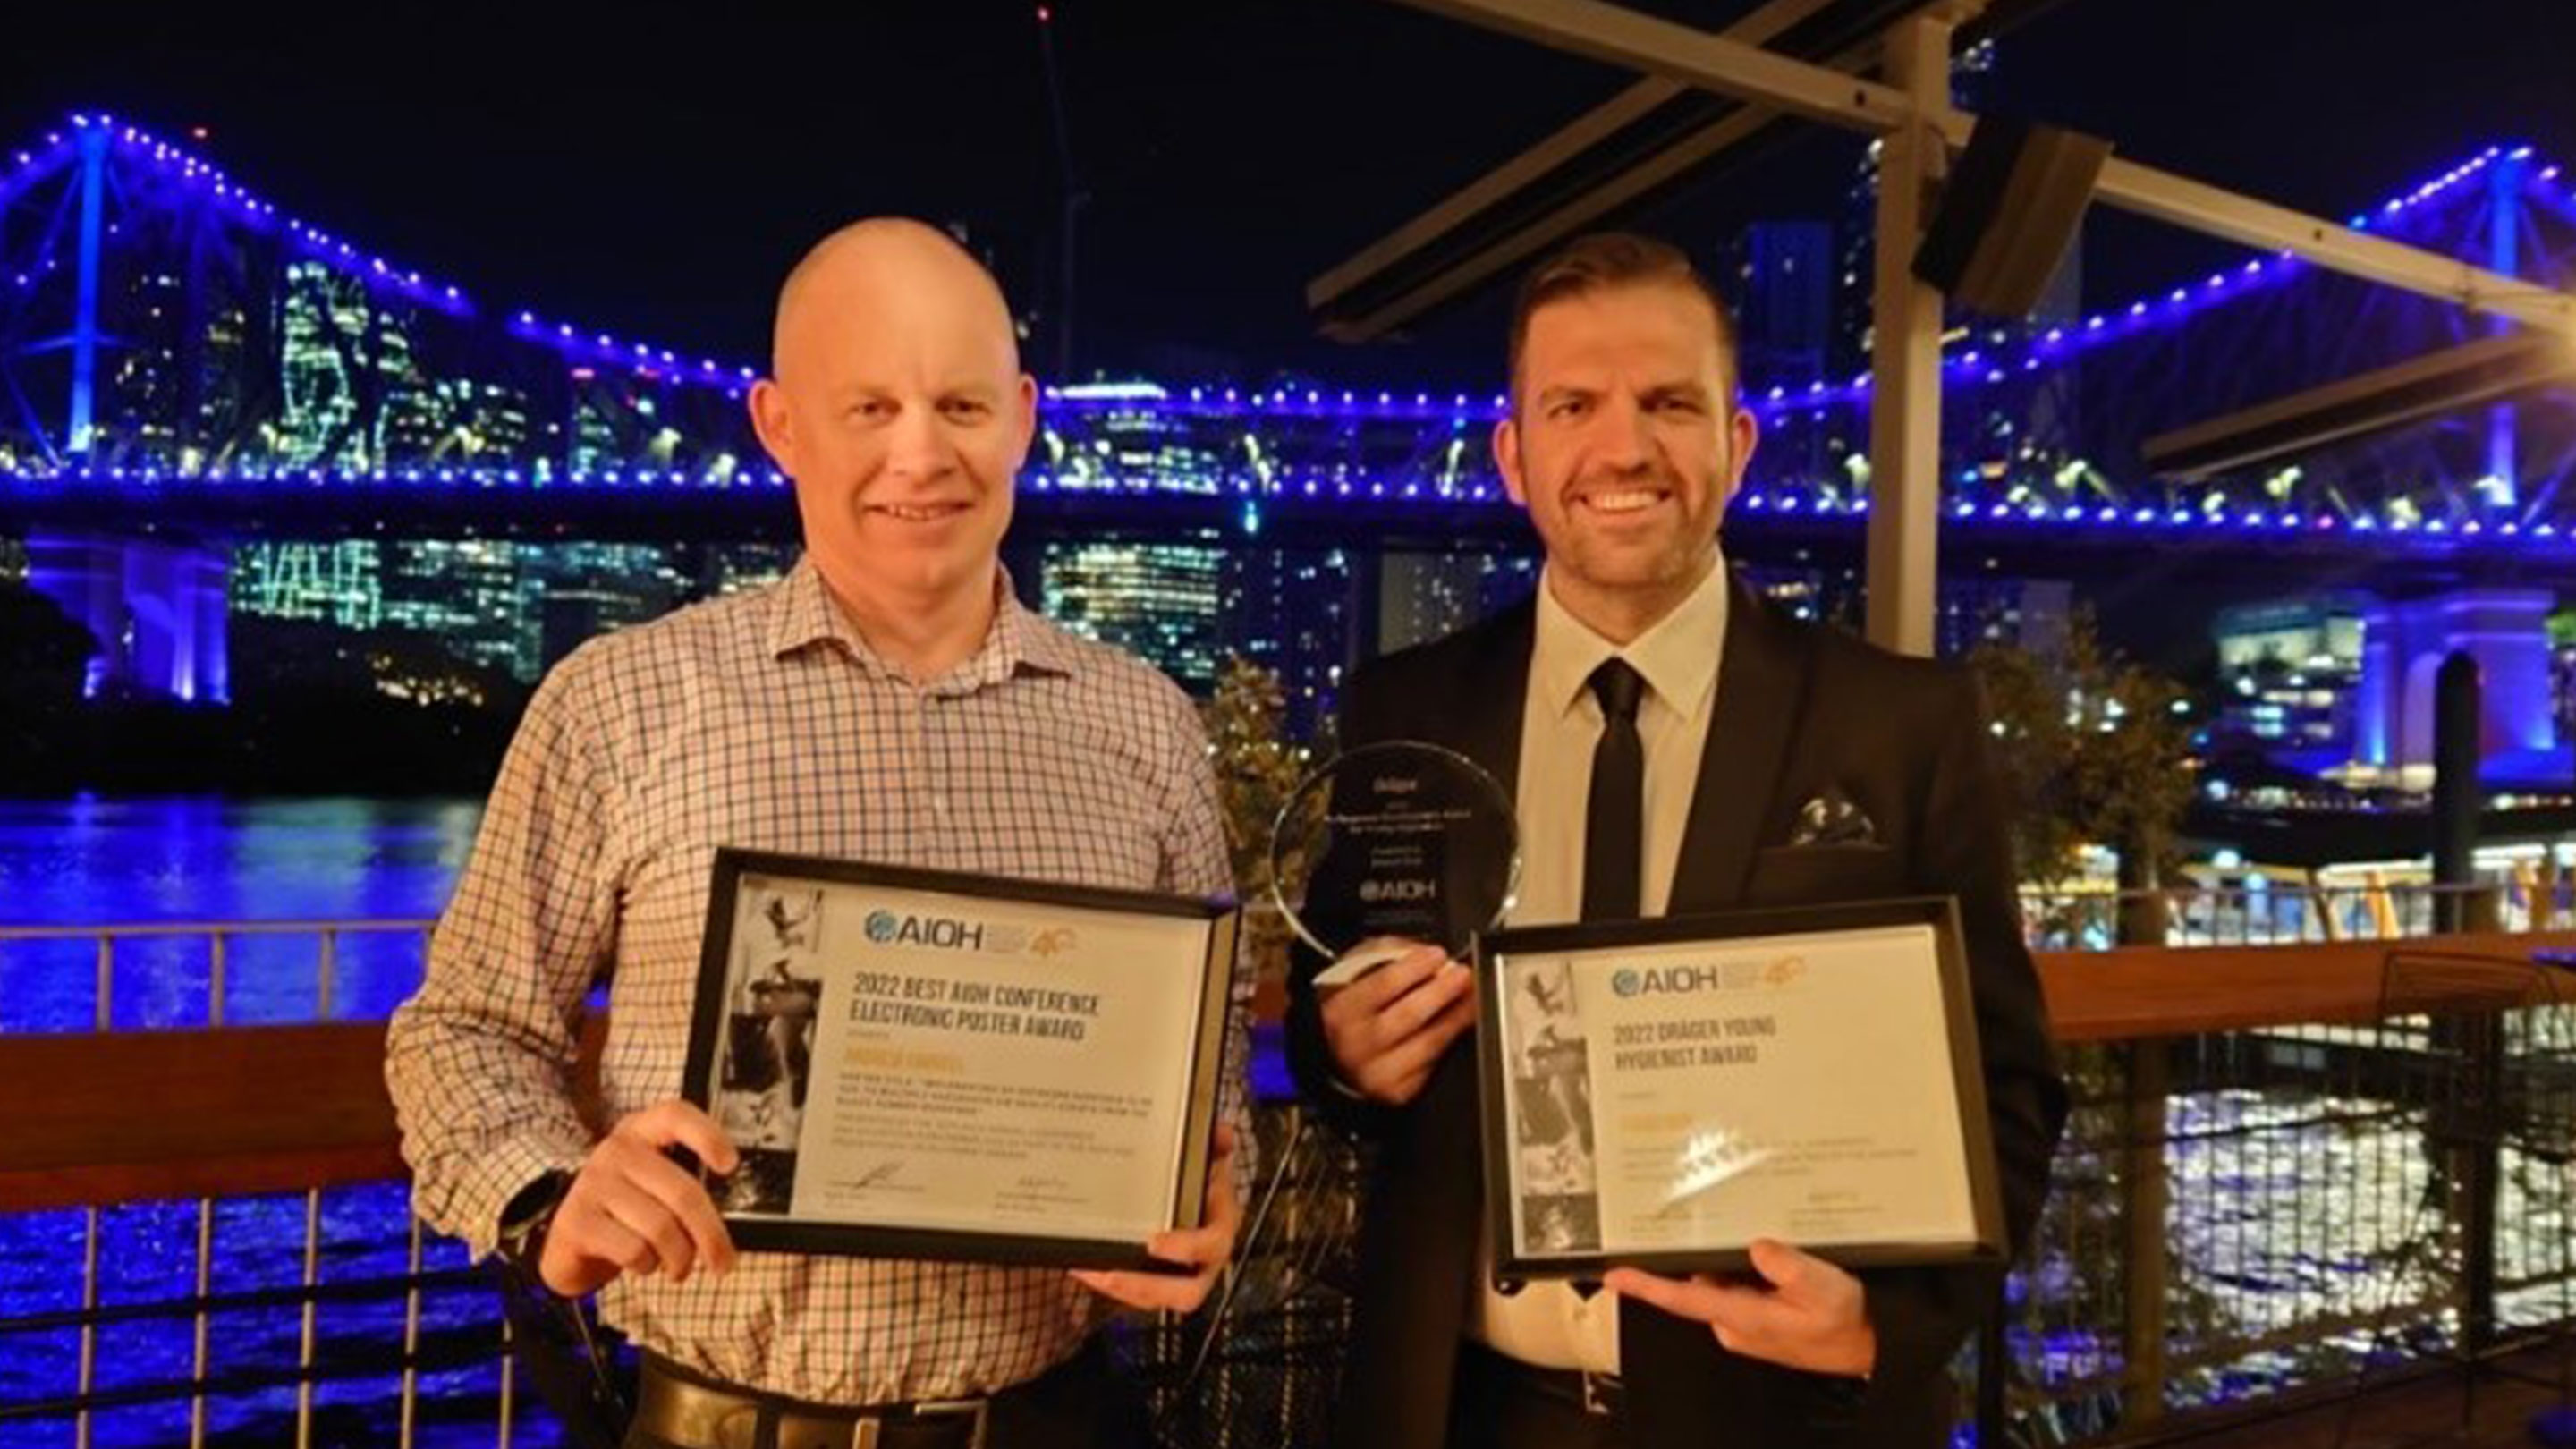 ExxonMobil Australia's Industrial Hygienists recognised with prestigious awards at industry conference